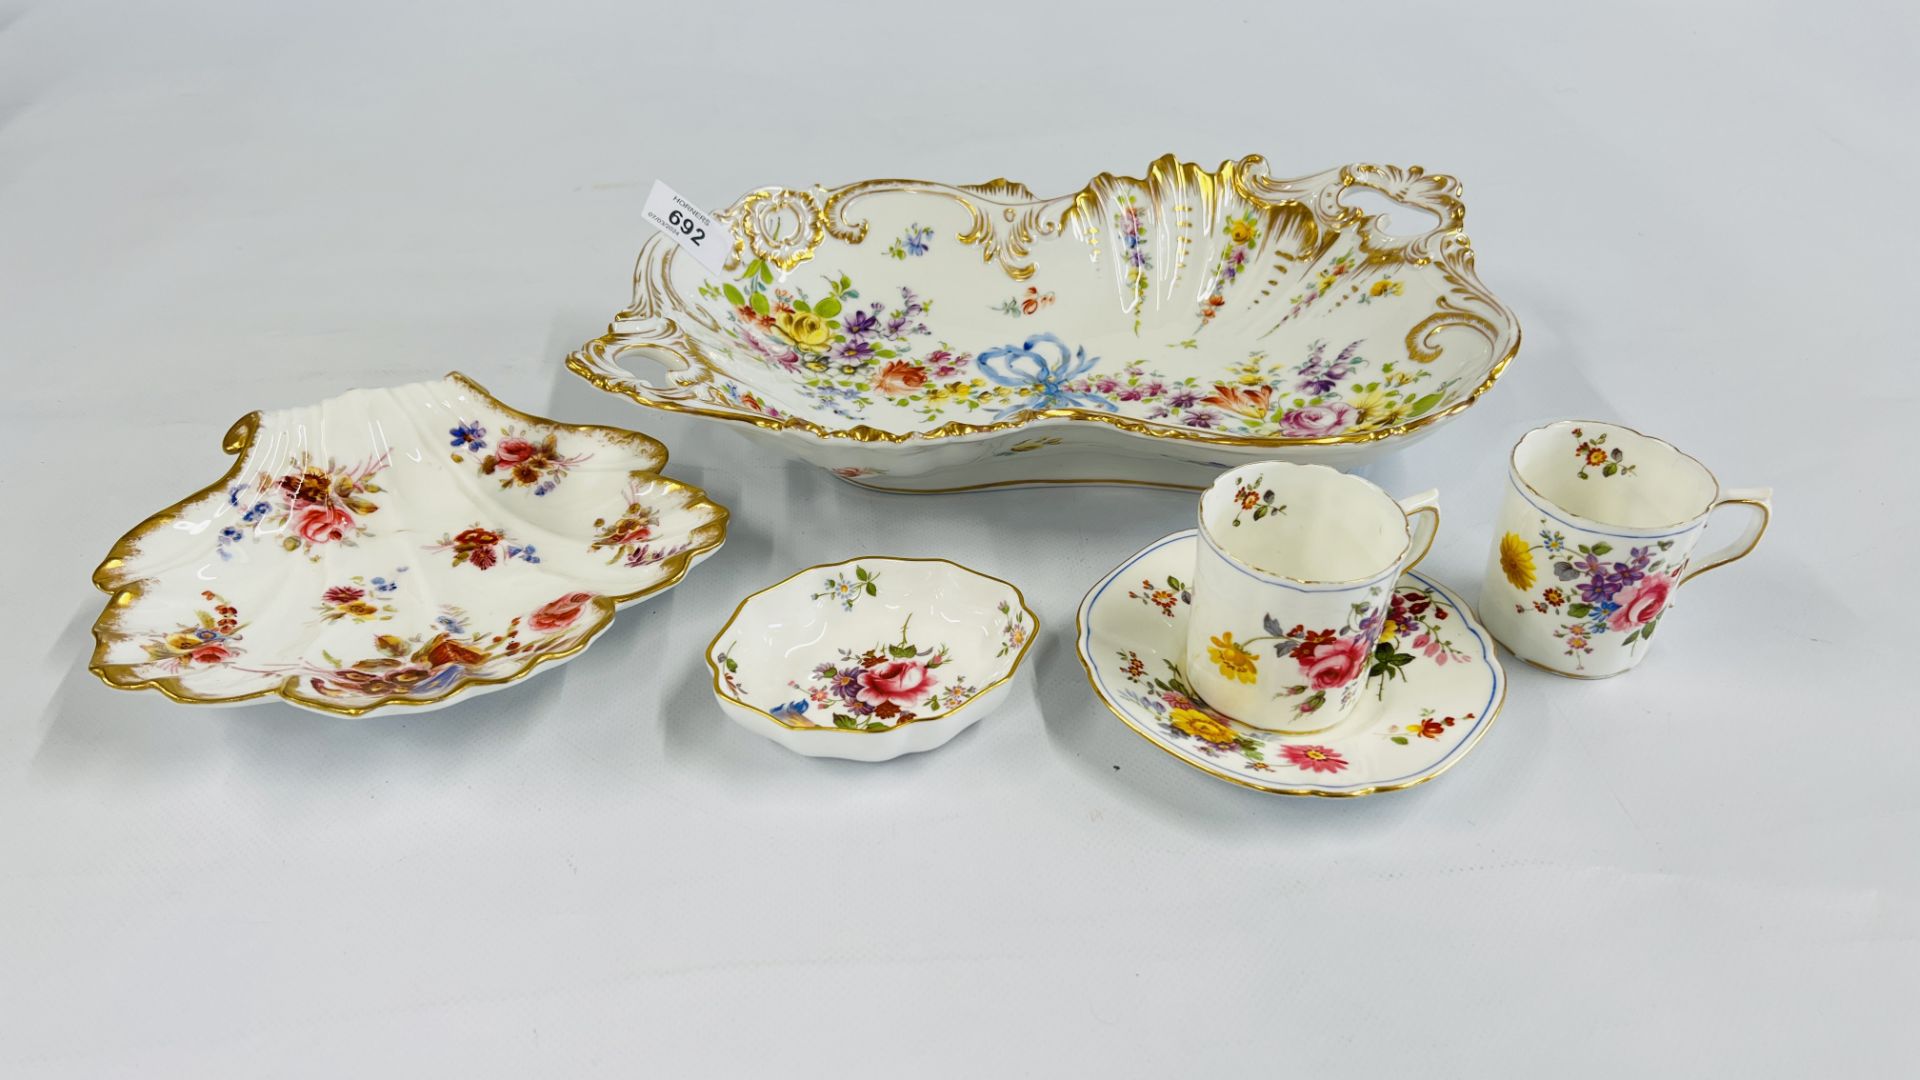 AN ELABORATE PORCELAIN TWO HANDLED DISH MARKED DRESDEN,